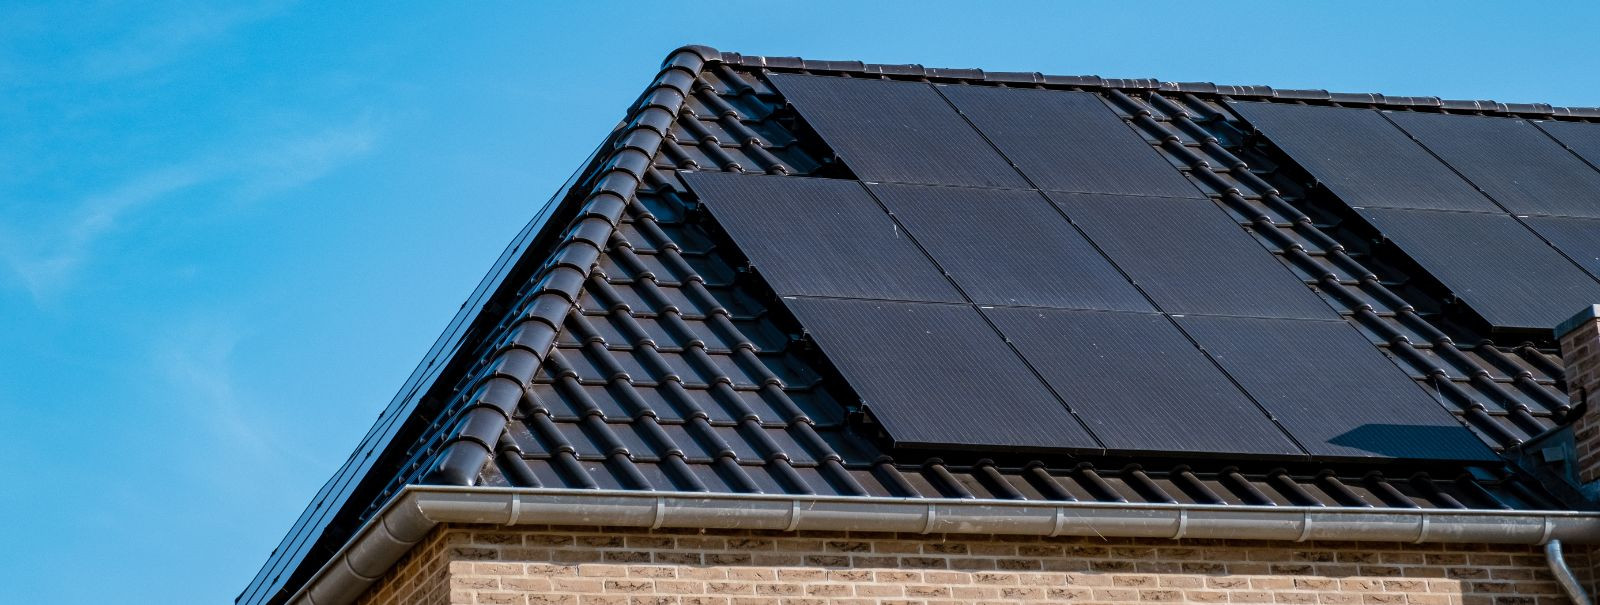 The roofing industry is undergoing a significant transformation, driven by advances in technology, shifts in consumer preferences, and the need for more sustain